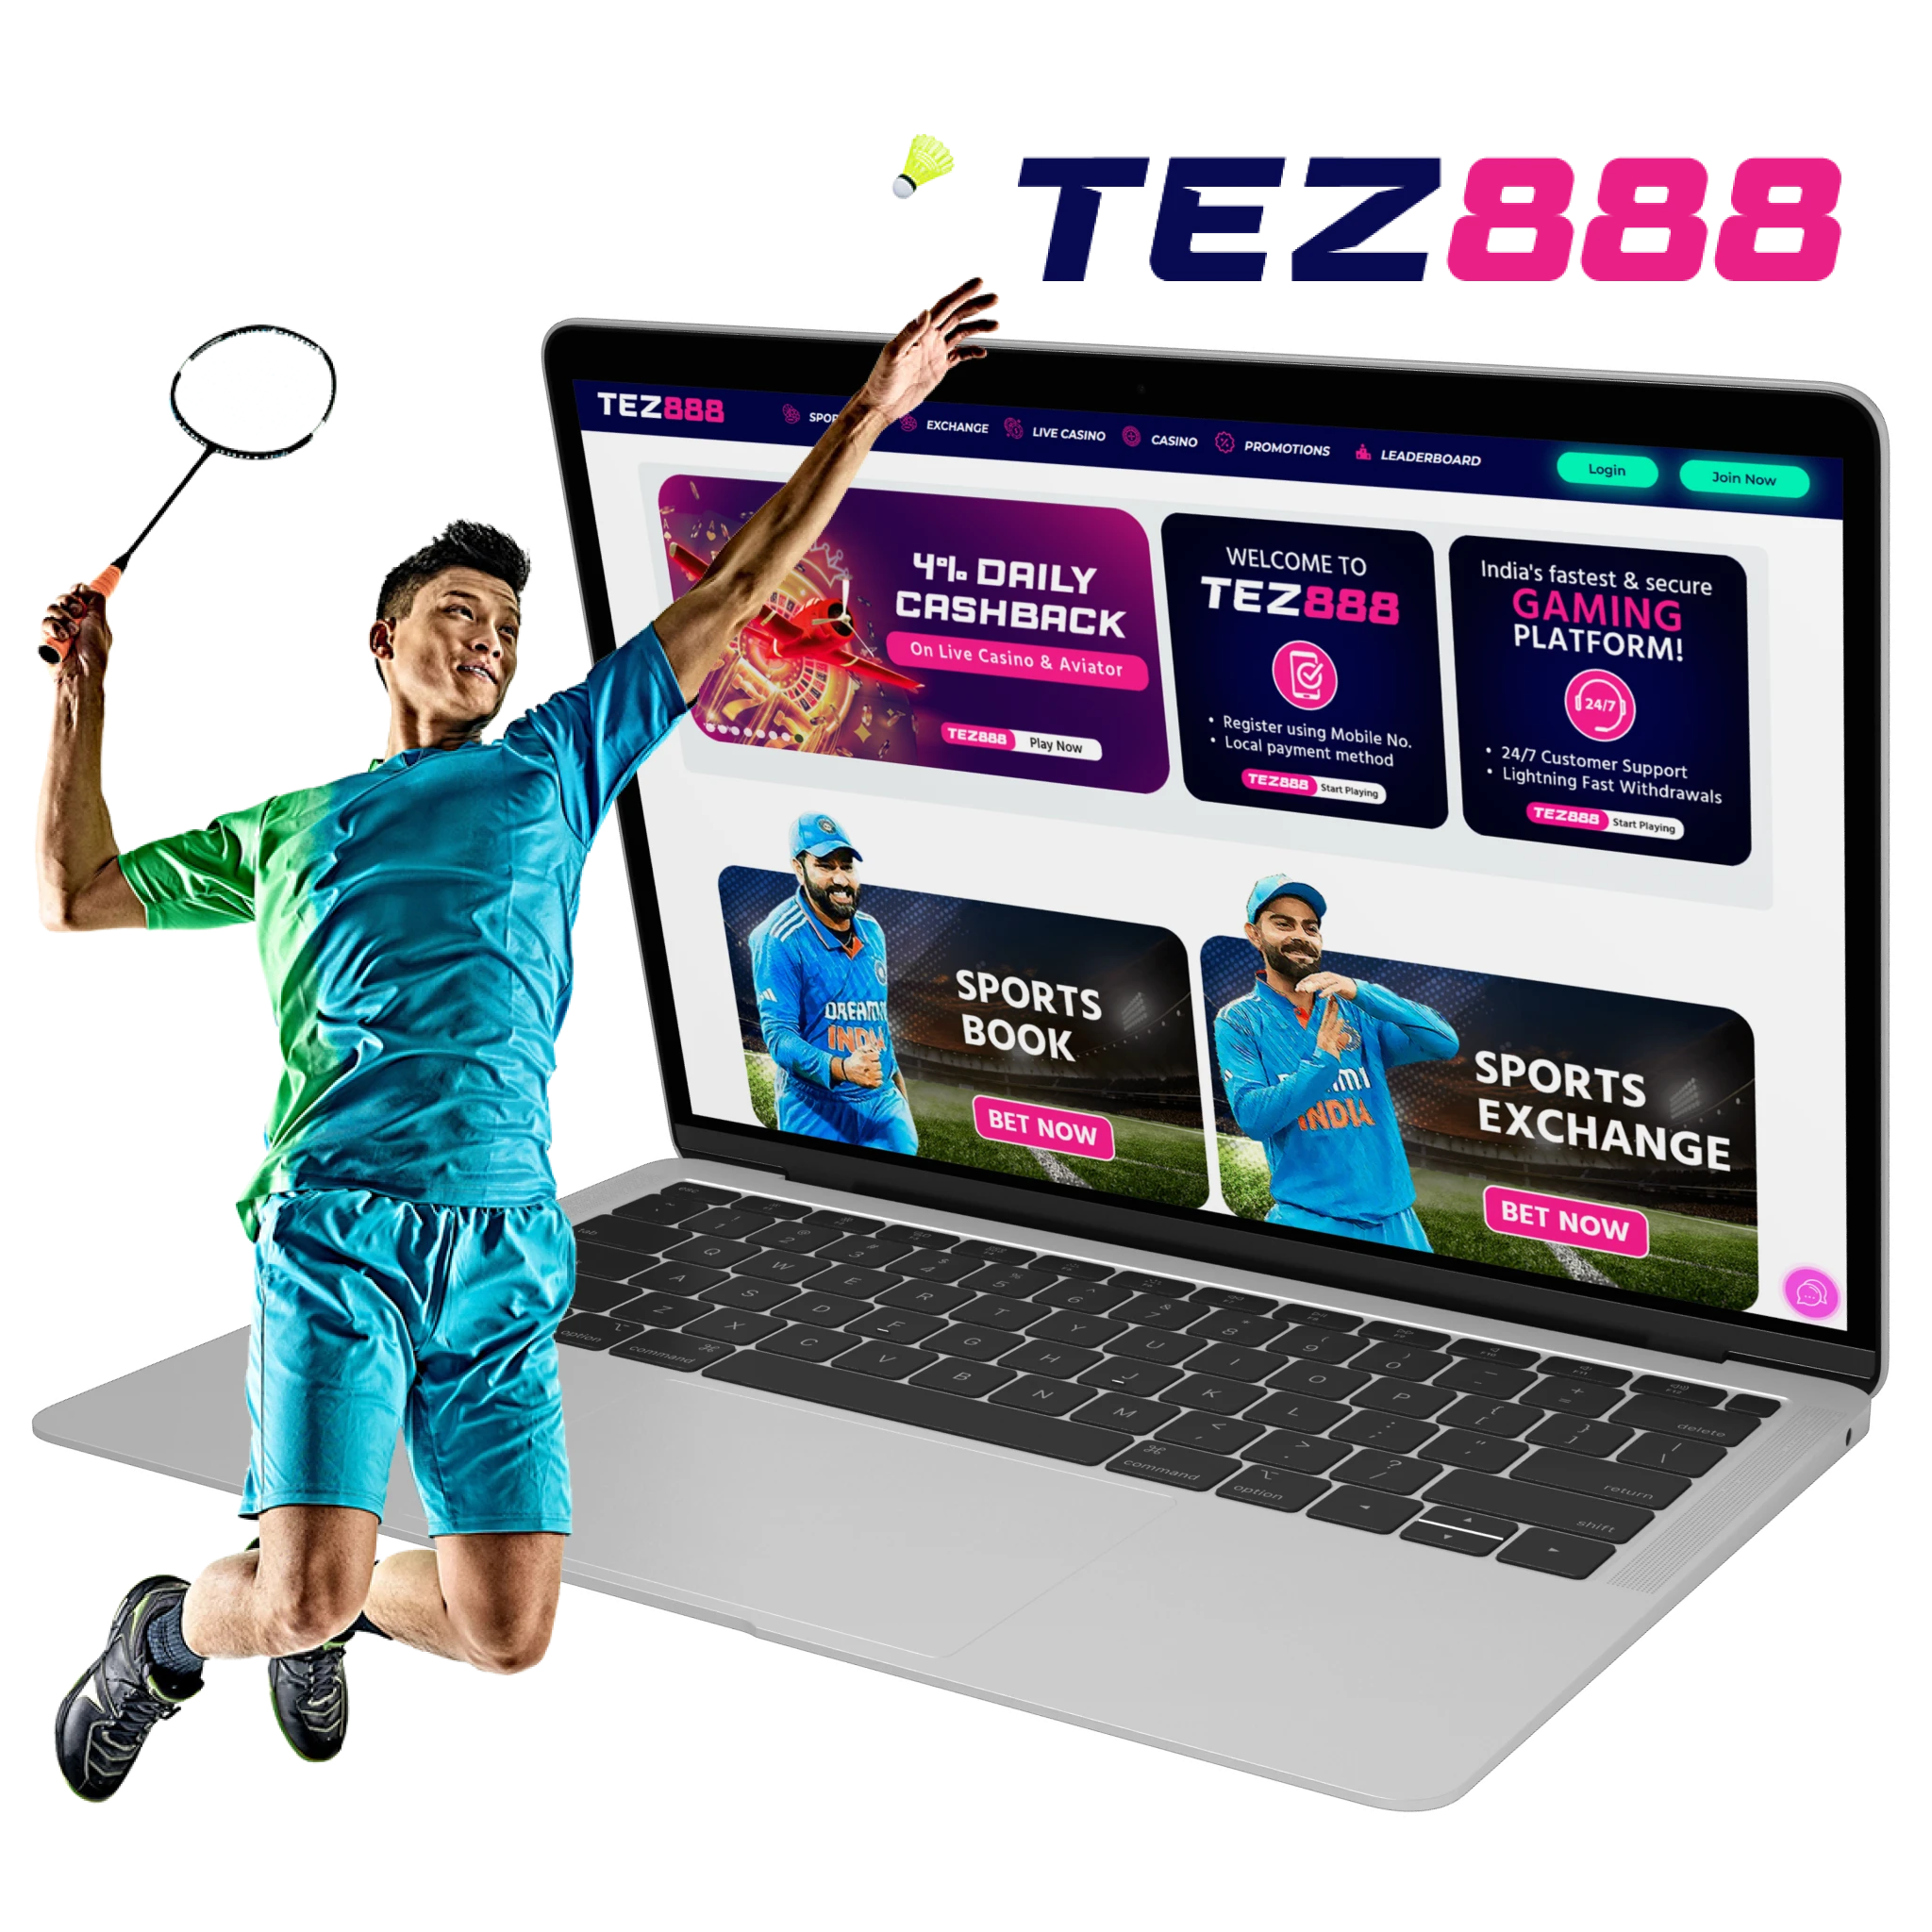 Tez888 boasts a wide array of bonuses and promotions for badminton betting.